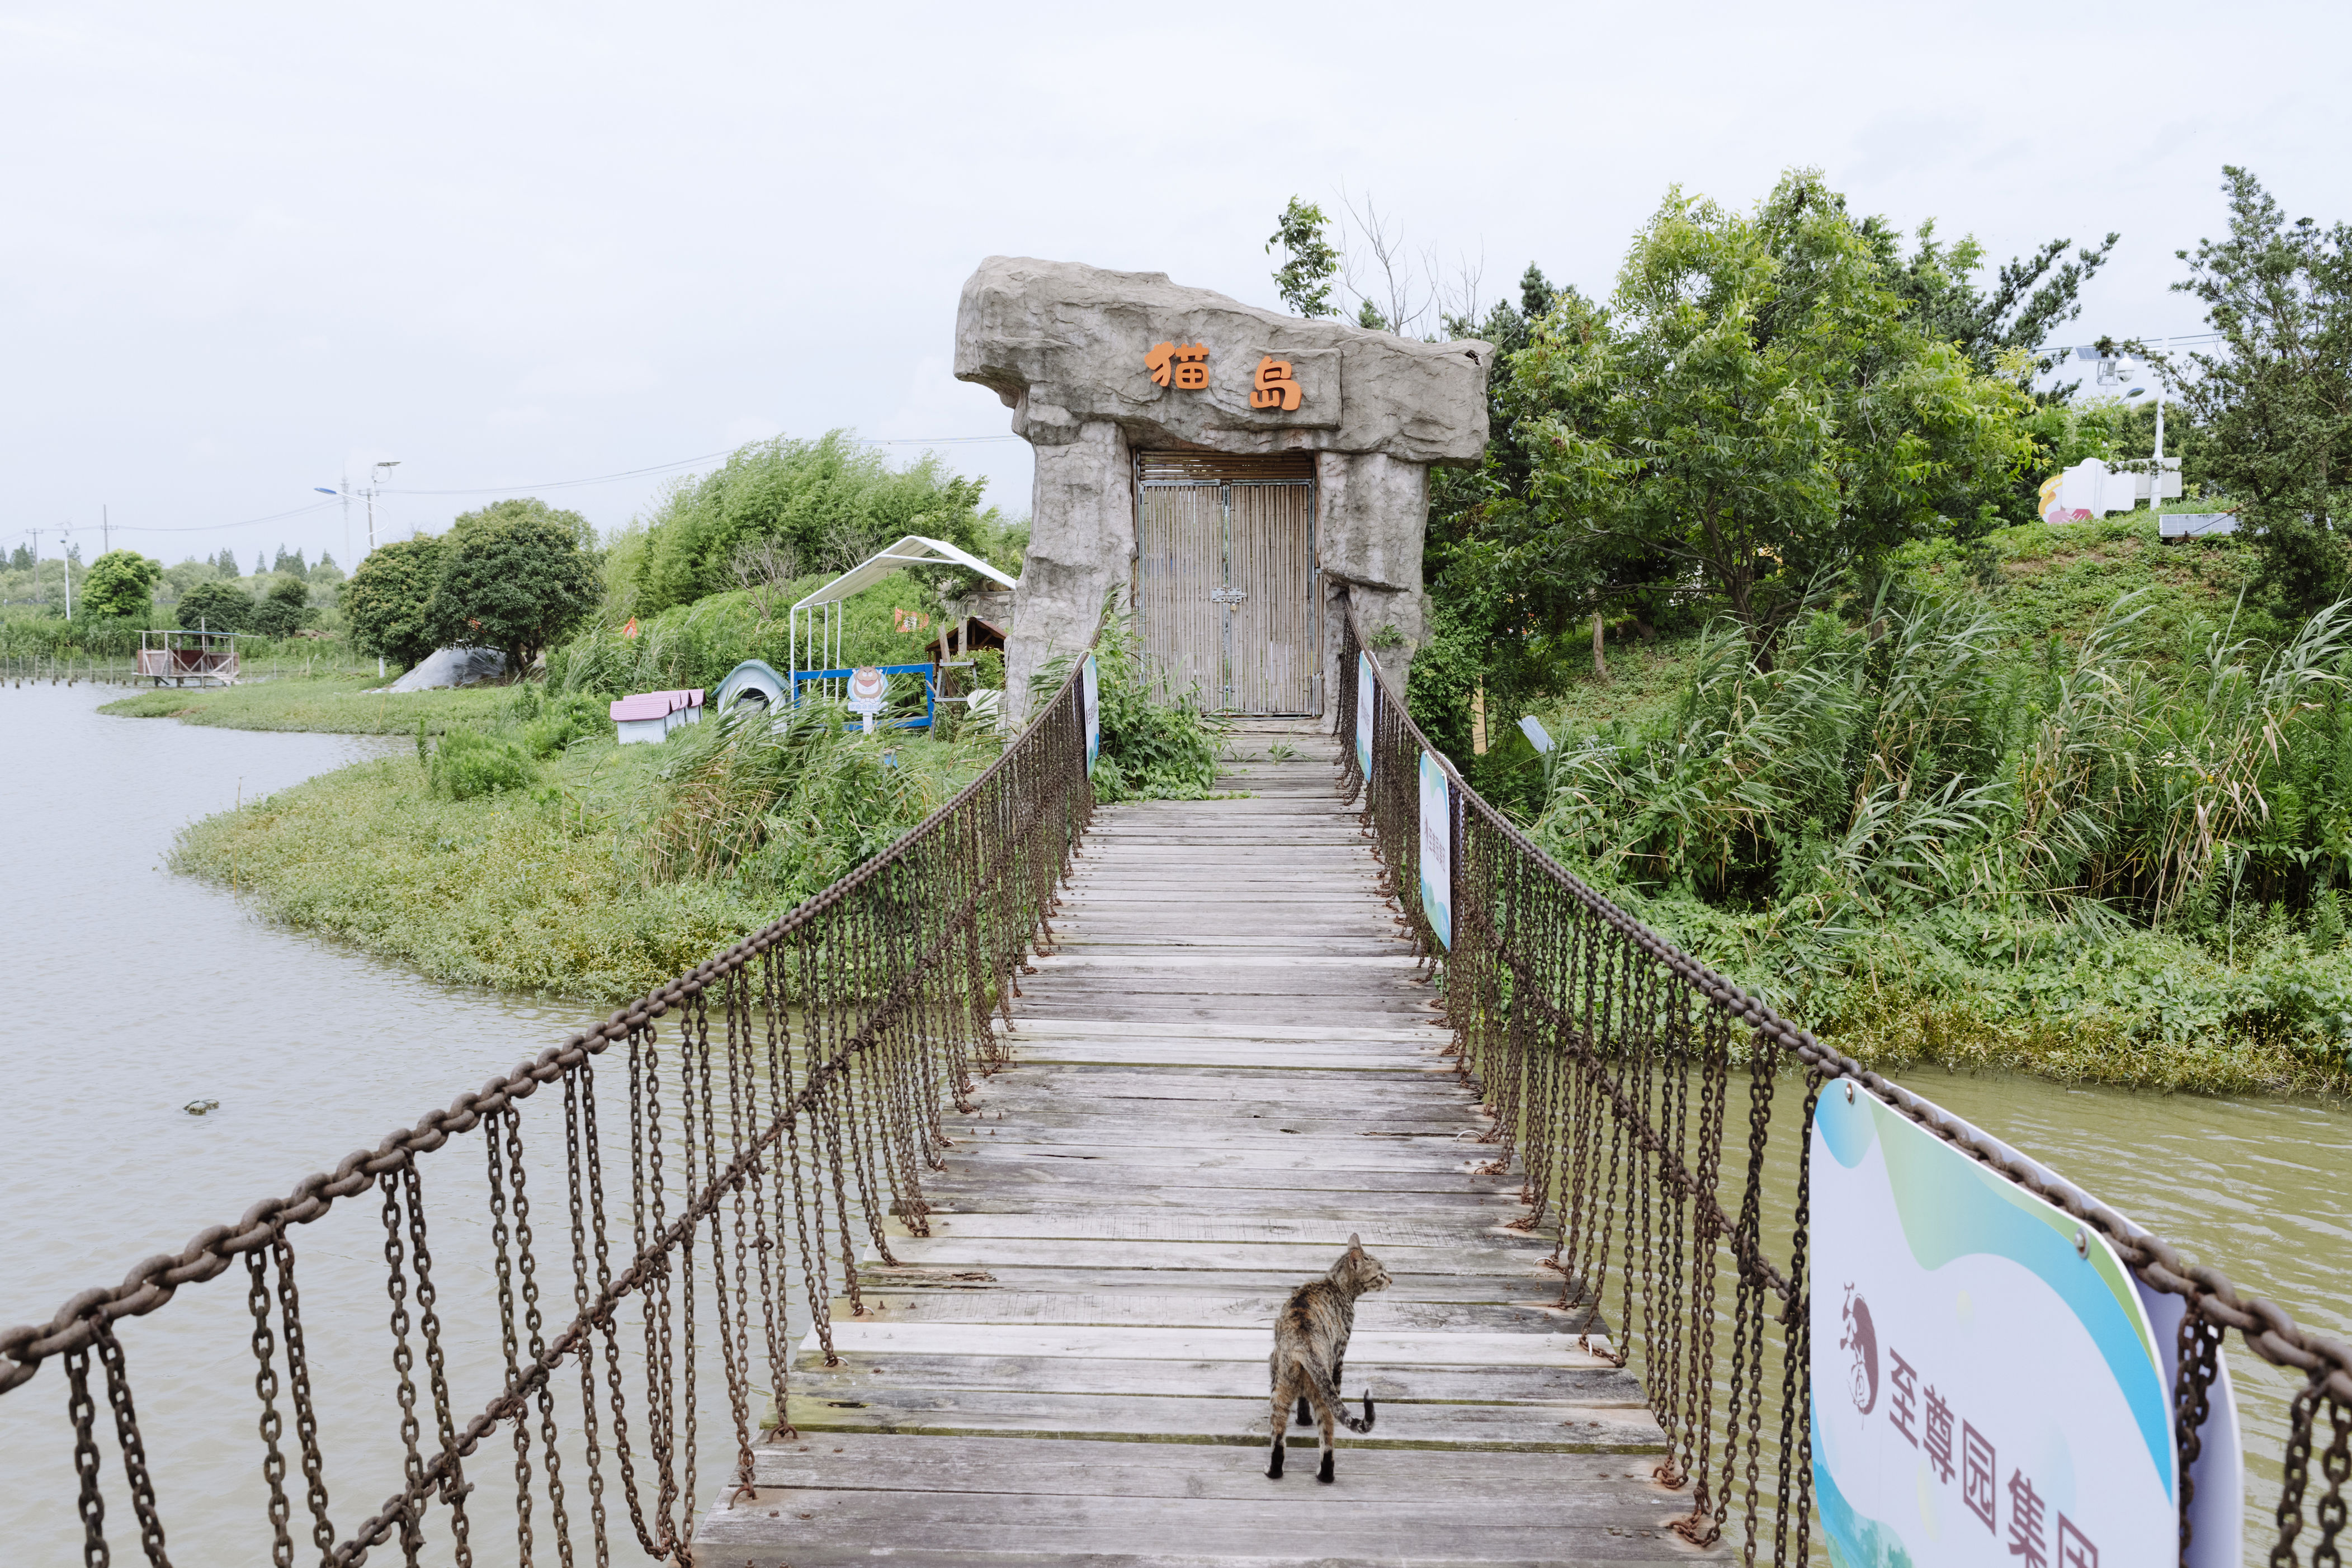 welcome to china’s cat island, where lucky strays wait for a new home